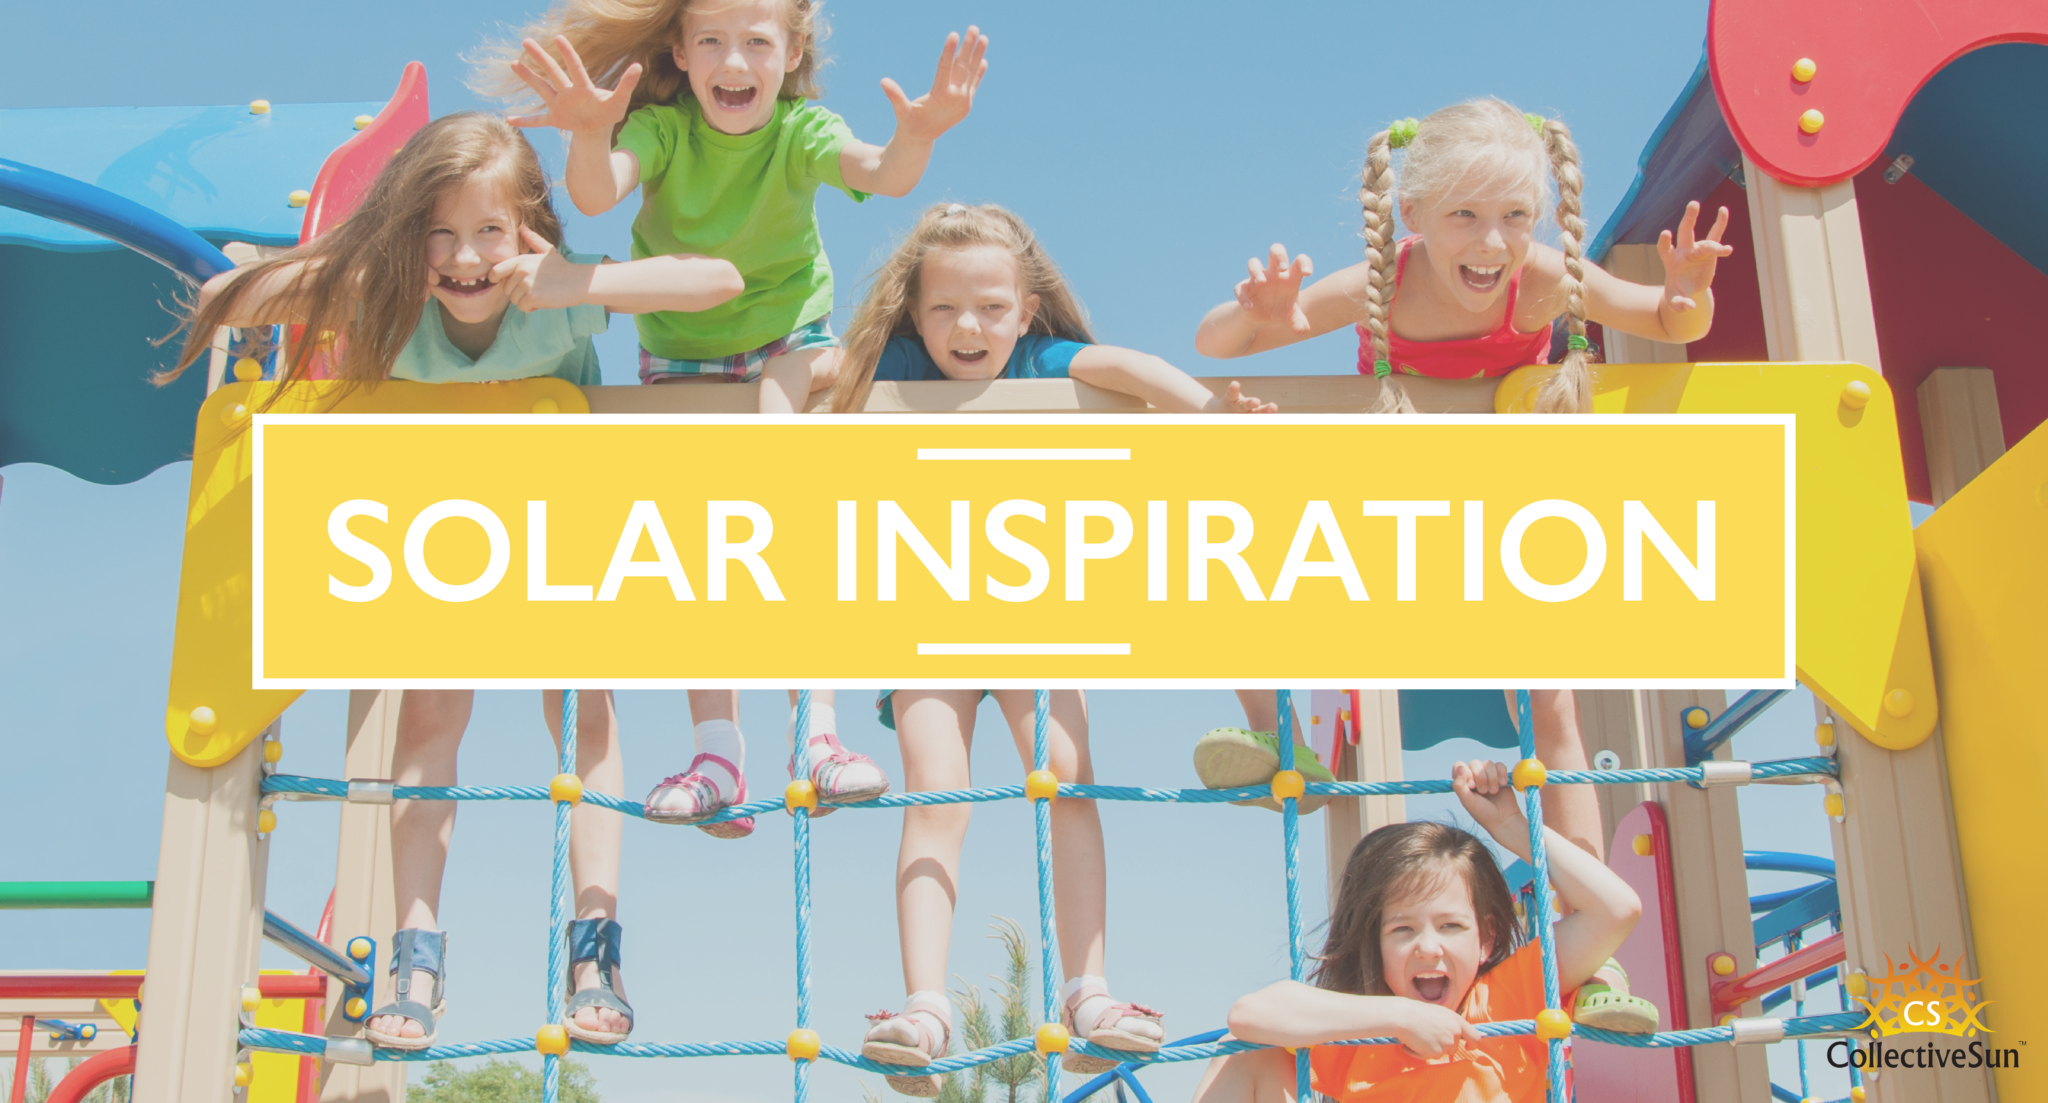 Solar Inspiration with kids in the background